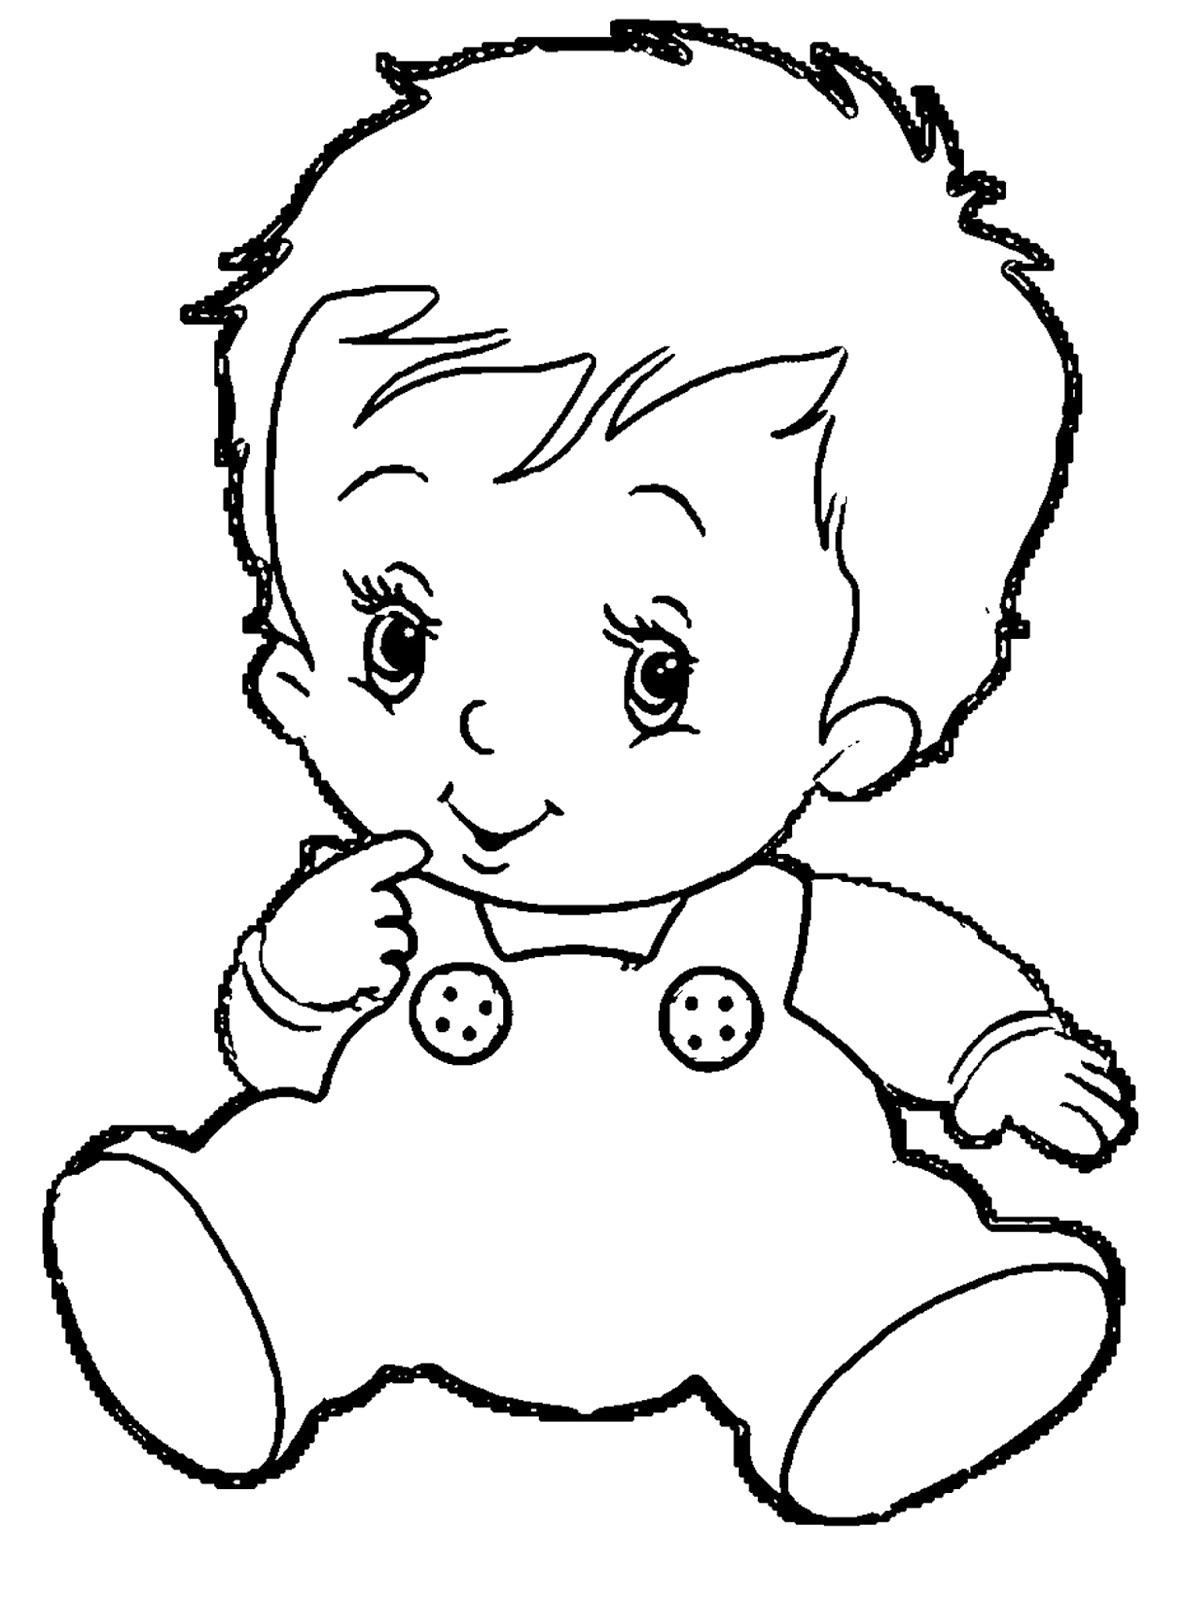 Black and white baby clipart